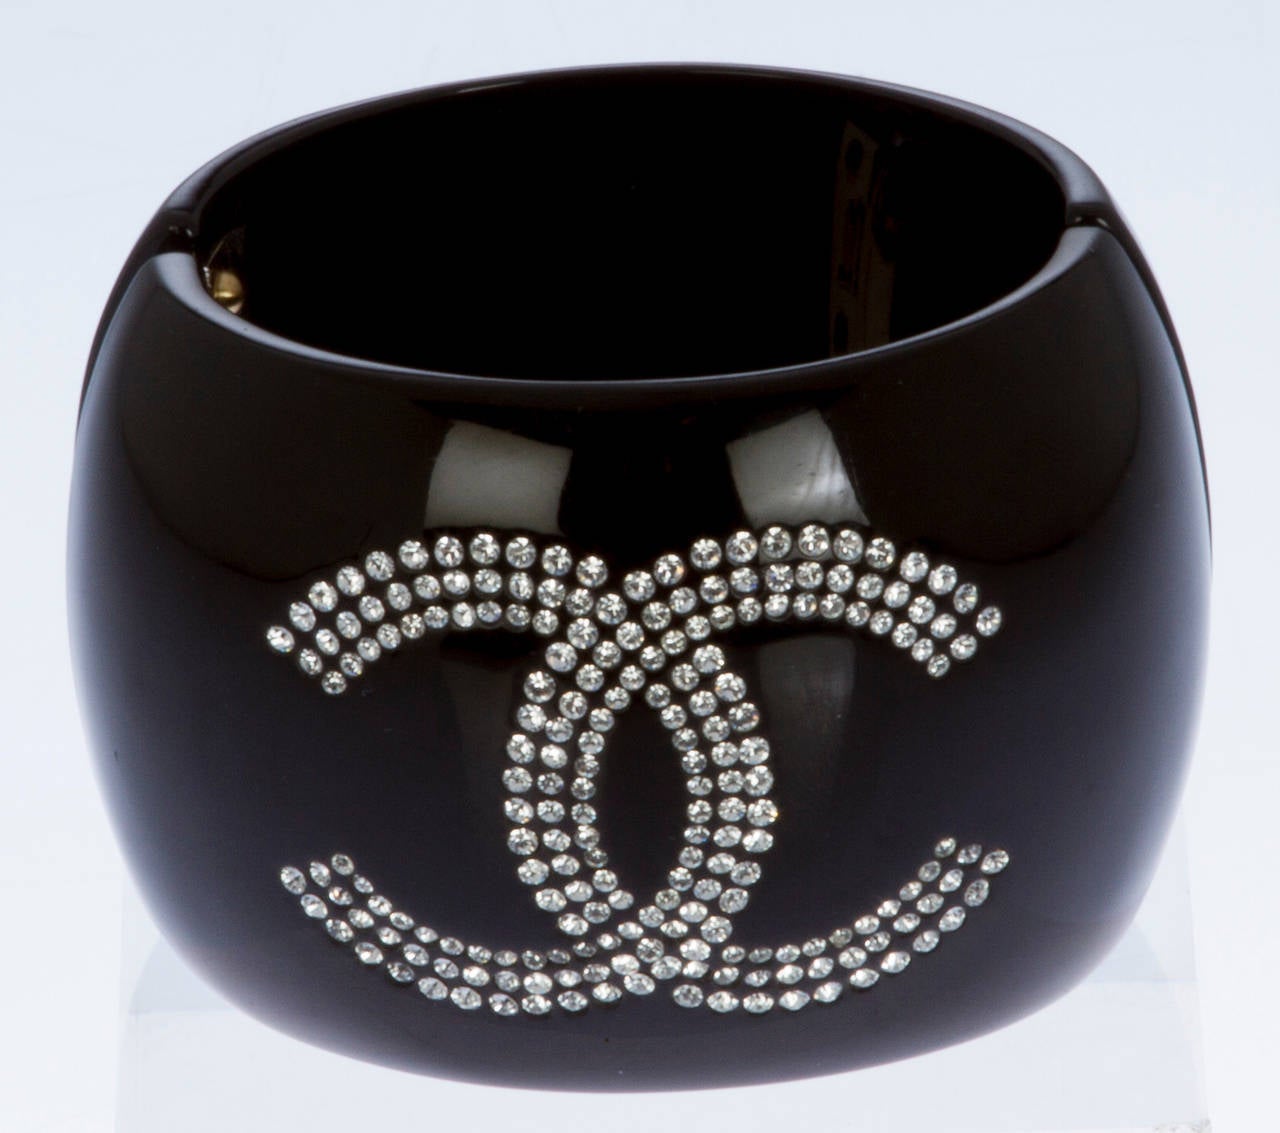 This is a striking resin cuff studded with crystals.  The interior circumference is 6.5